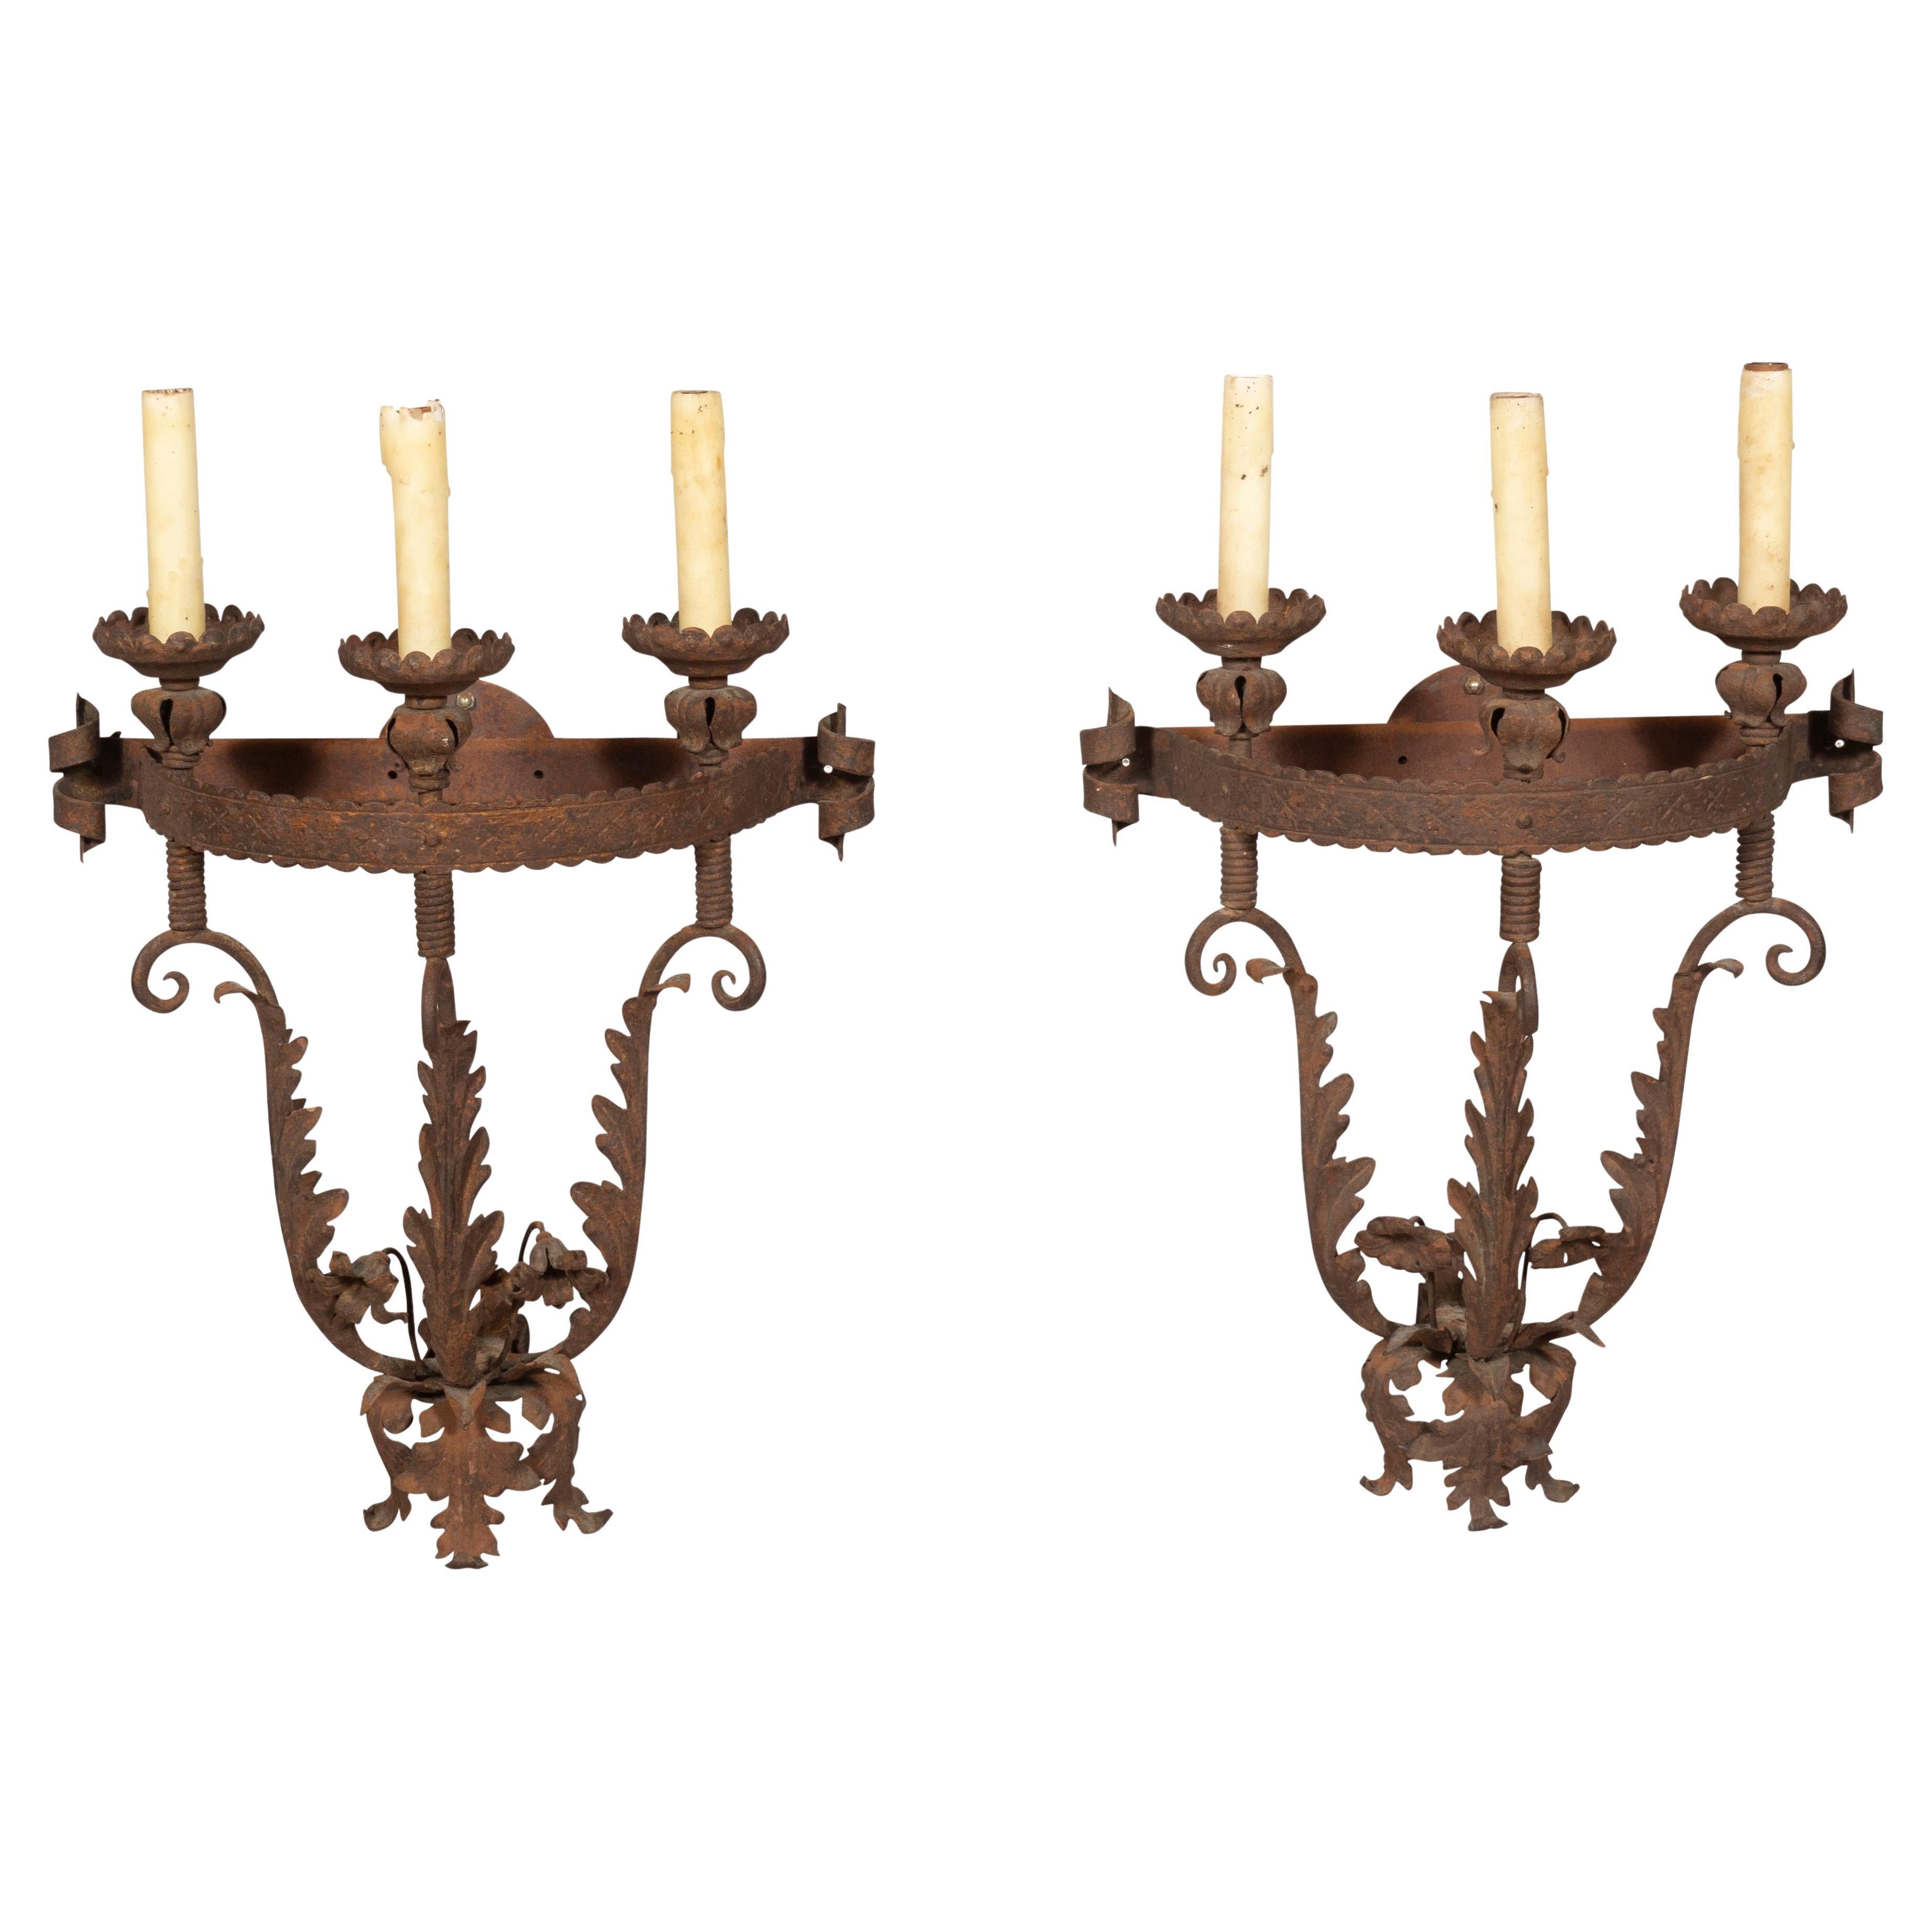 Baroque Revival Set of 4 Wrought Iron Wall Sconces